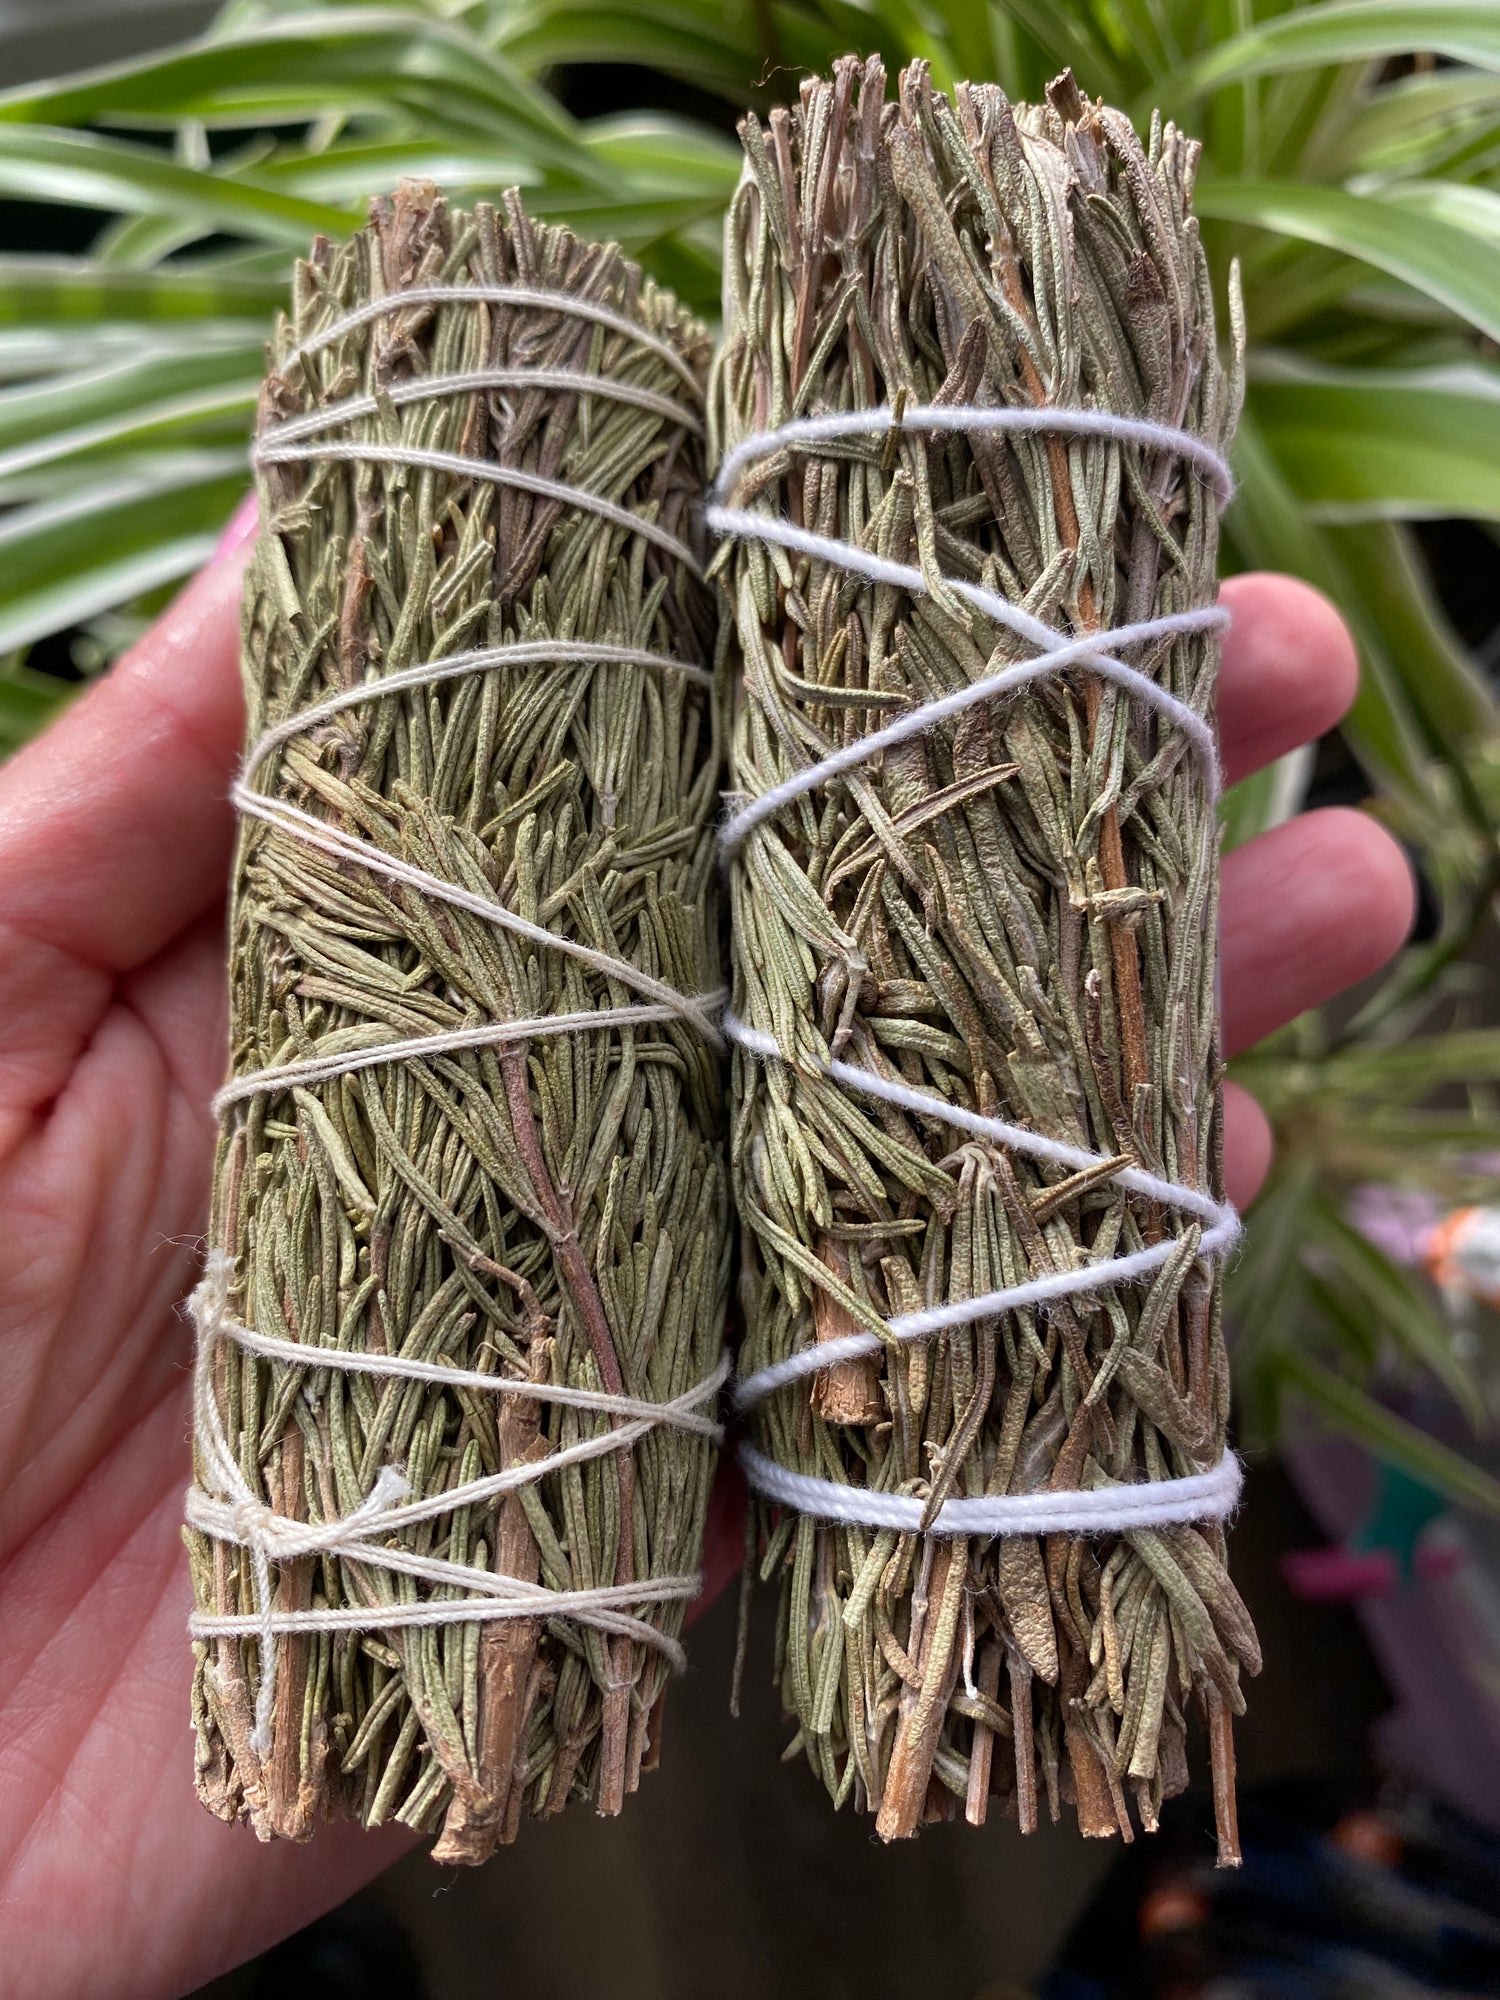 Rosemary Bundle-Premium quality- hand tied -No pesticides- sun dried - Moon Room Shop and Wellness